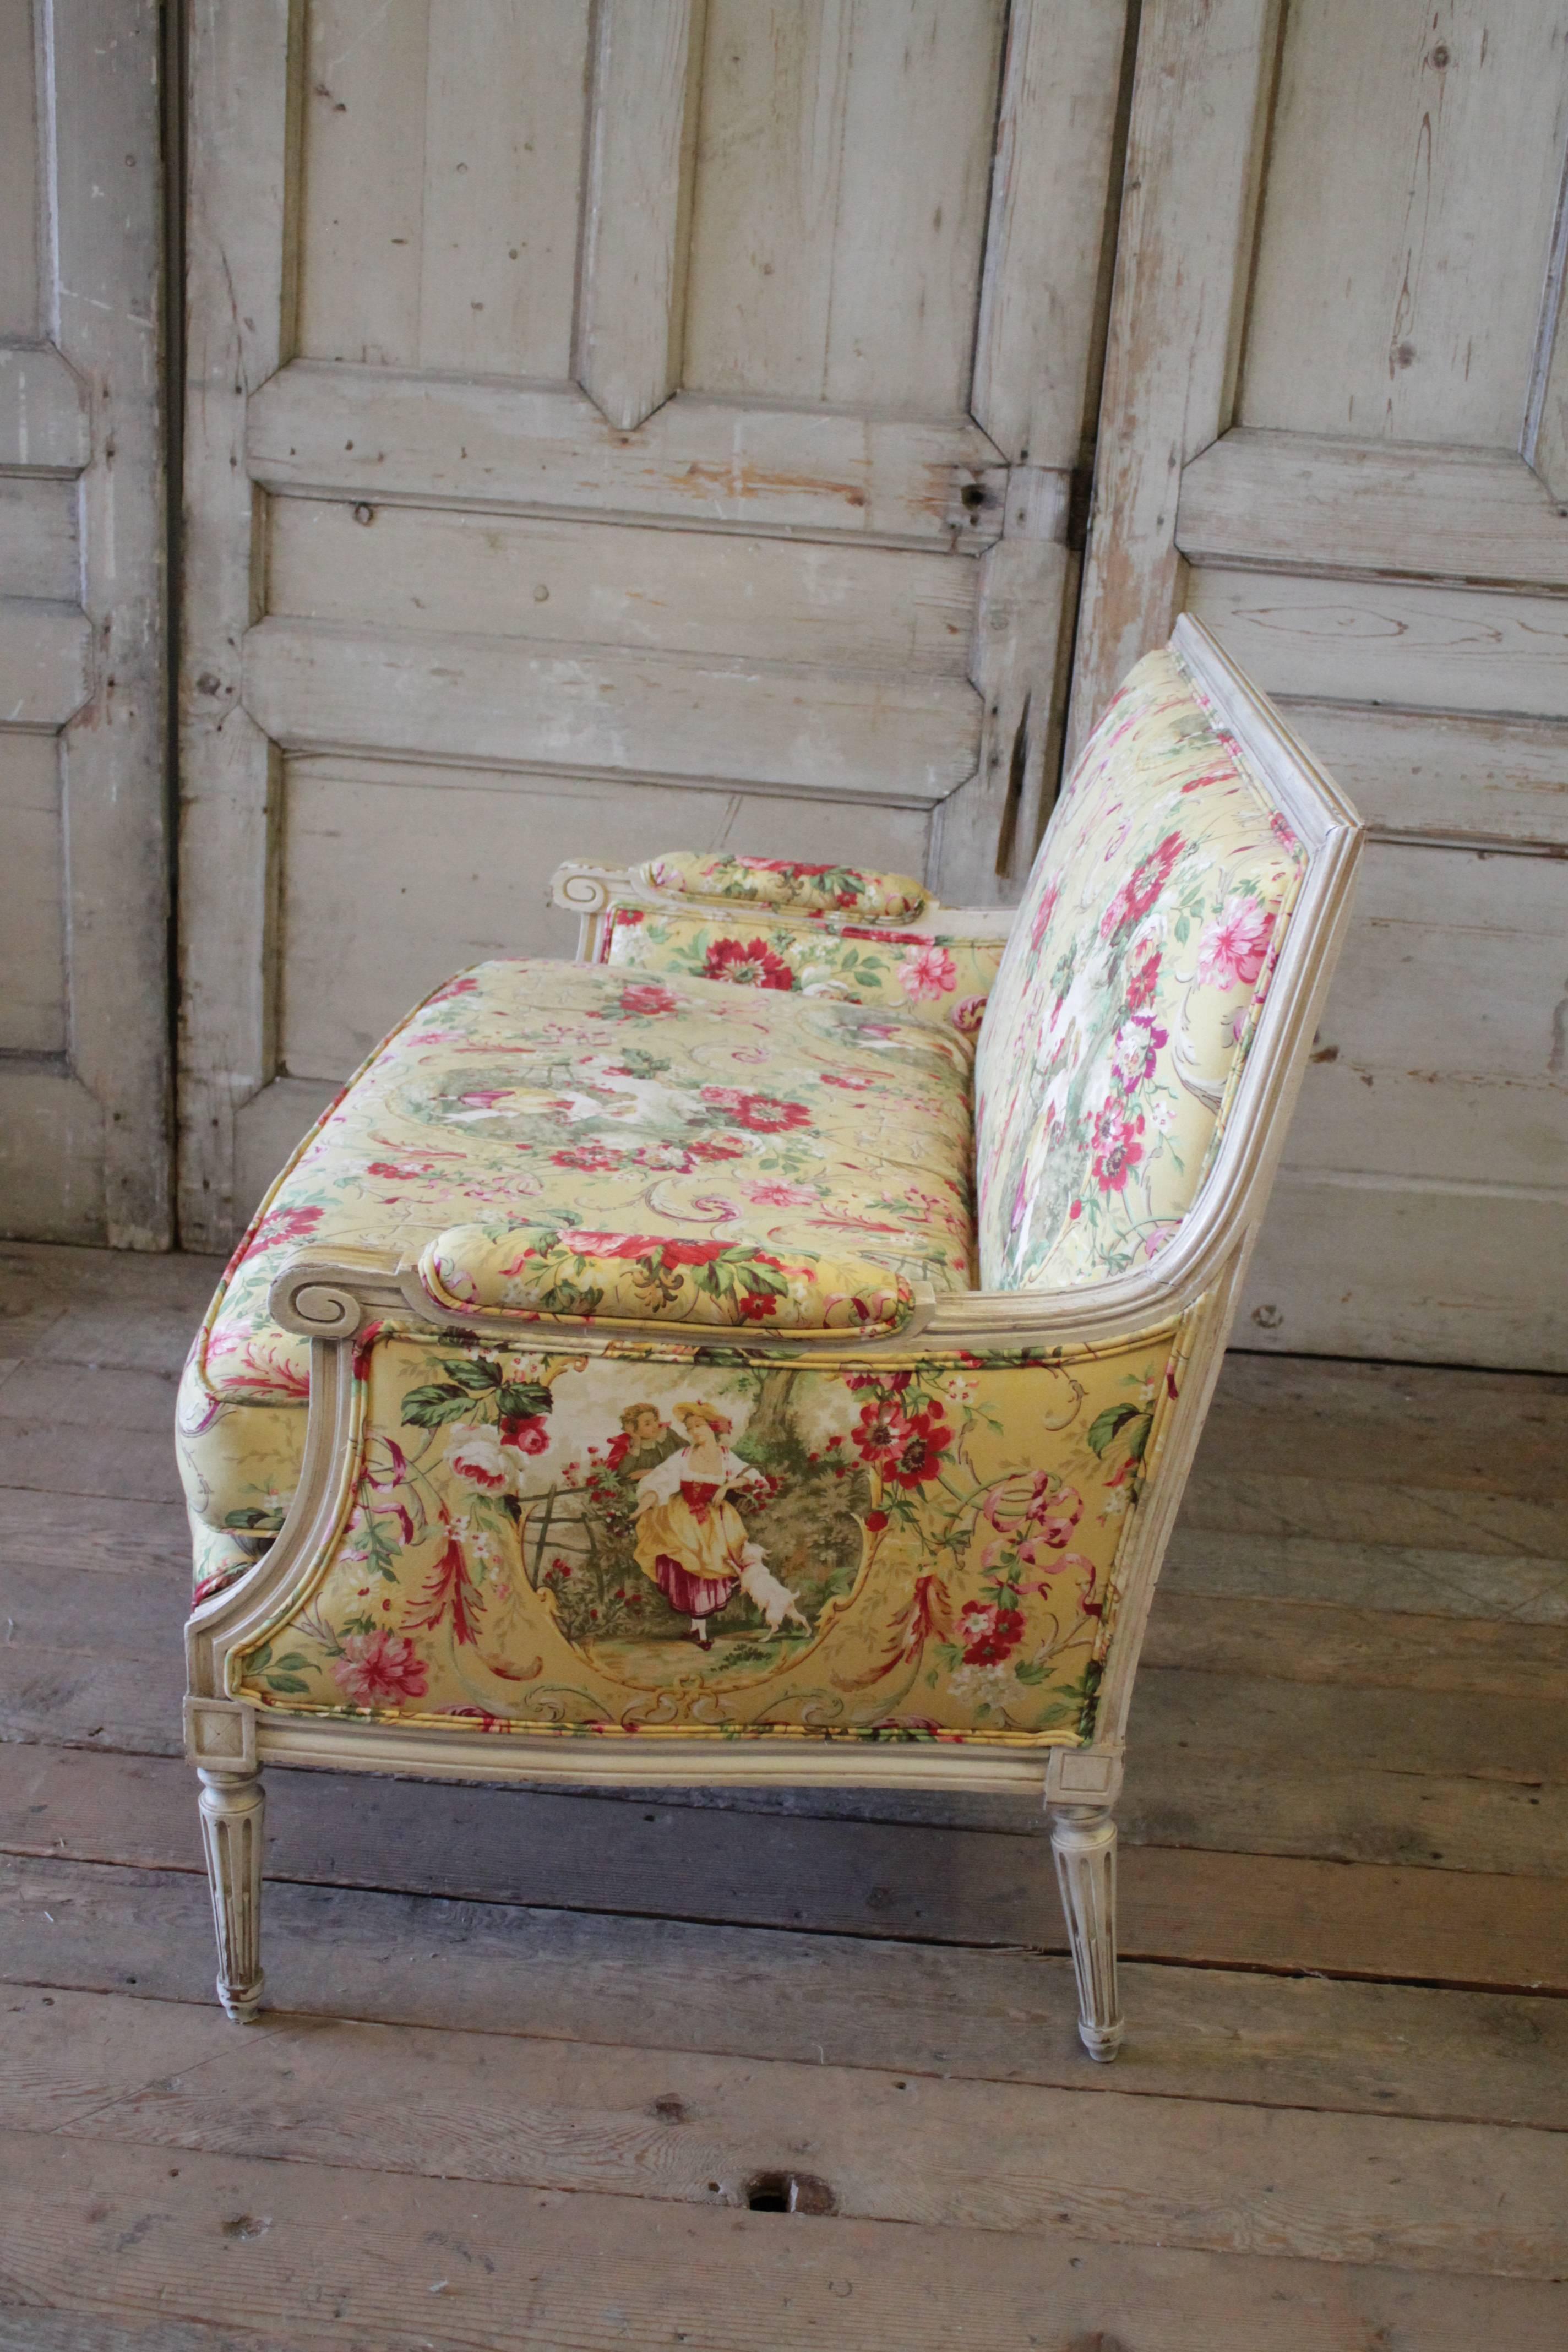 Upholstery Early 20th Century Toile De Jouy Upholstered Louis XVI Style Settee